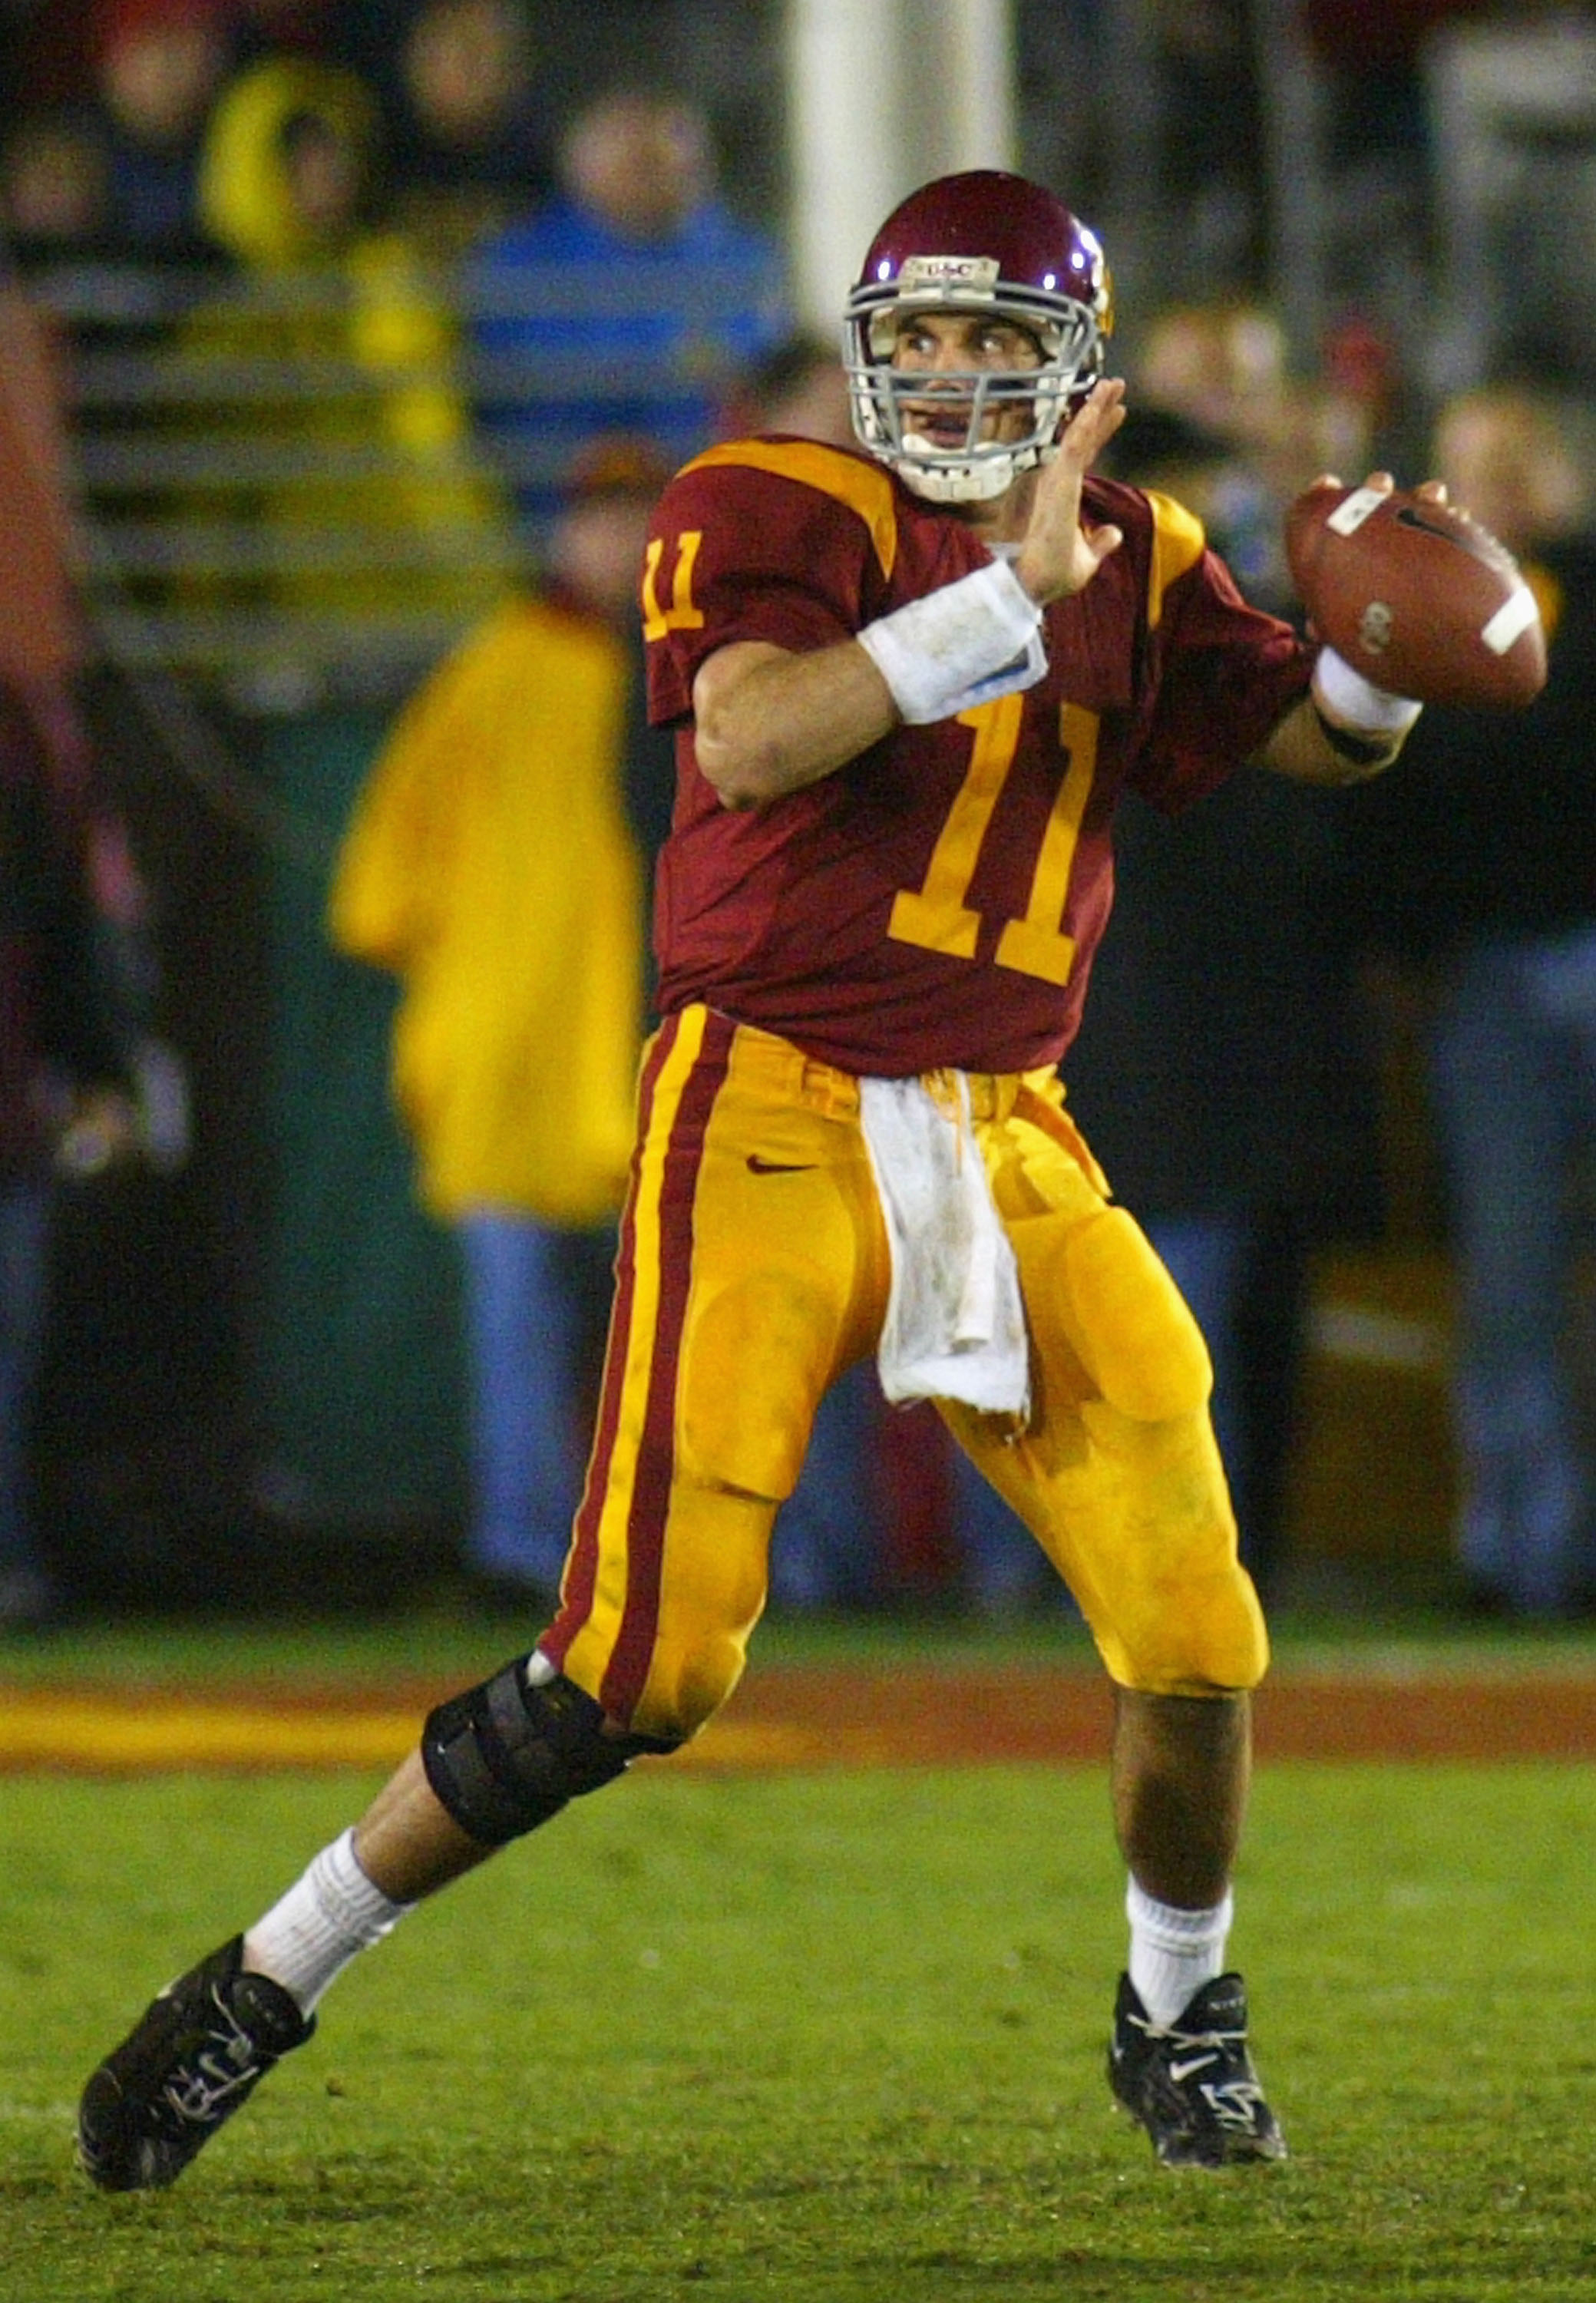 LOS ANGELES - NOVEMBER 27:  Quarterback Matt Leinart #11 of the USC Trojans sets to throw a touchdown pass against the Notre Dame Fighting Irish on November 27, 2004 at the Los Angeles Coliseum in Los Angeles, California. USC won 41-10.  (Photo by Christi